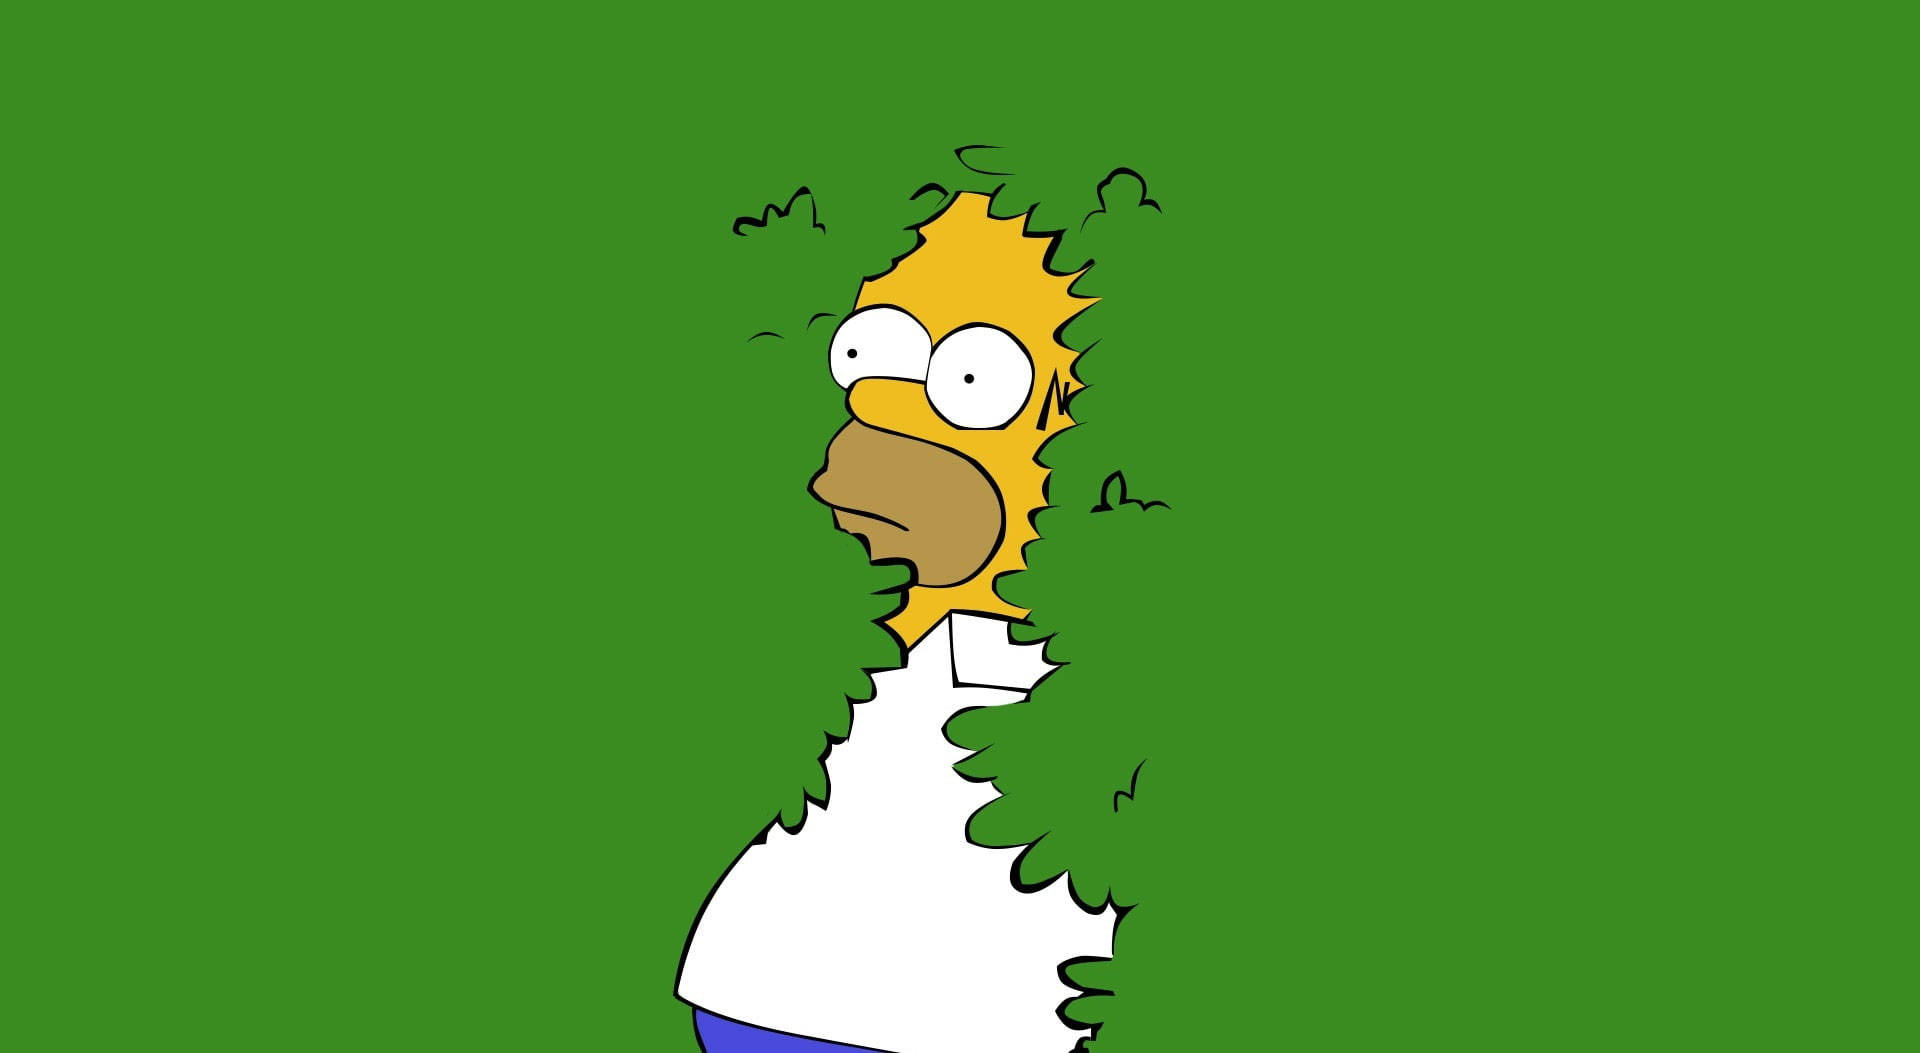 Homer Simpson in a "funny moment". Wallpaper